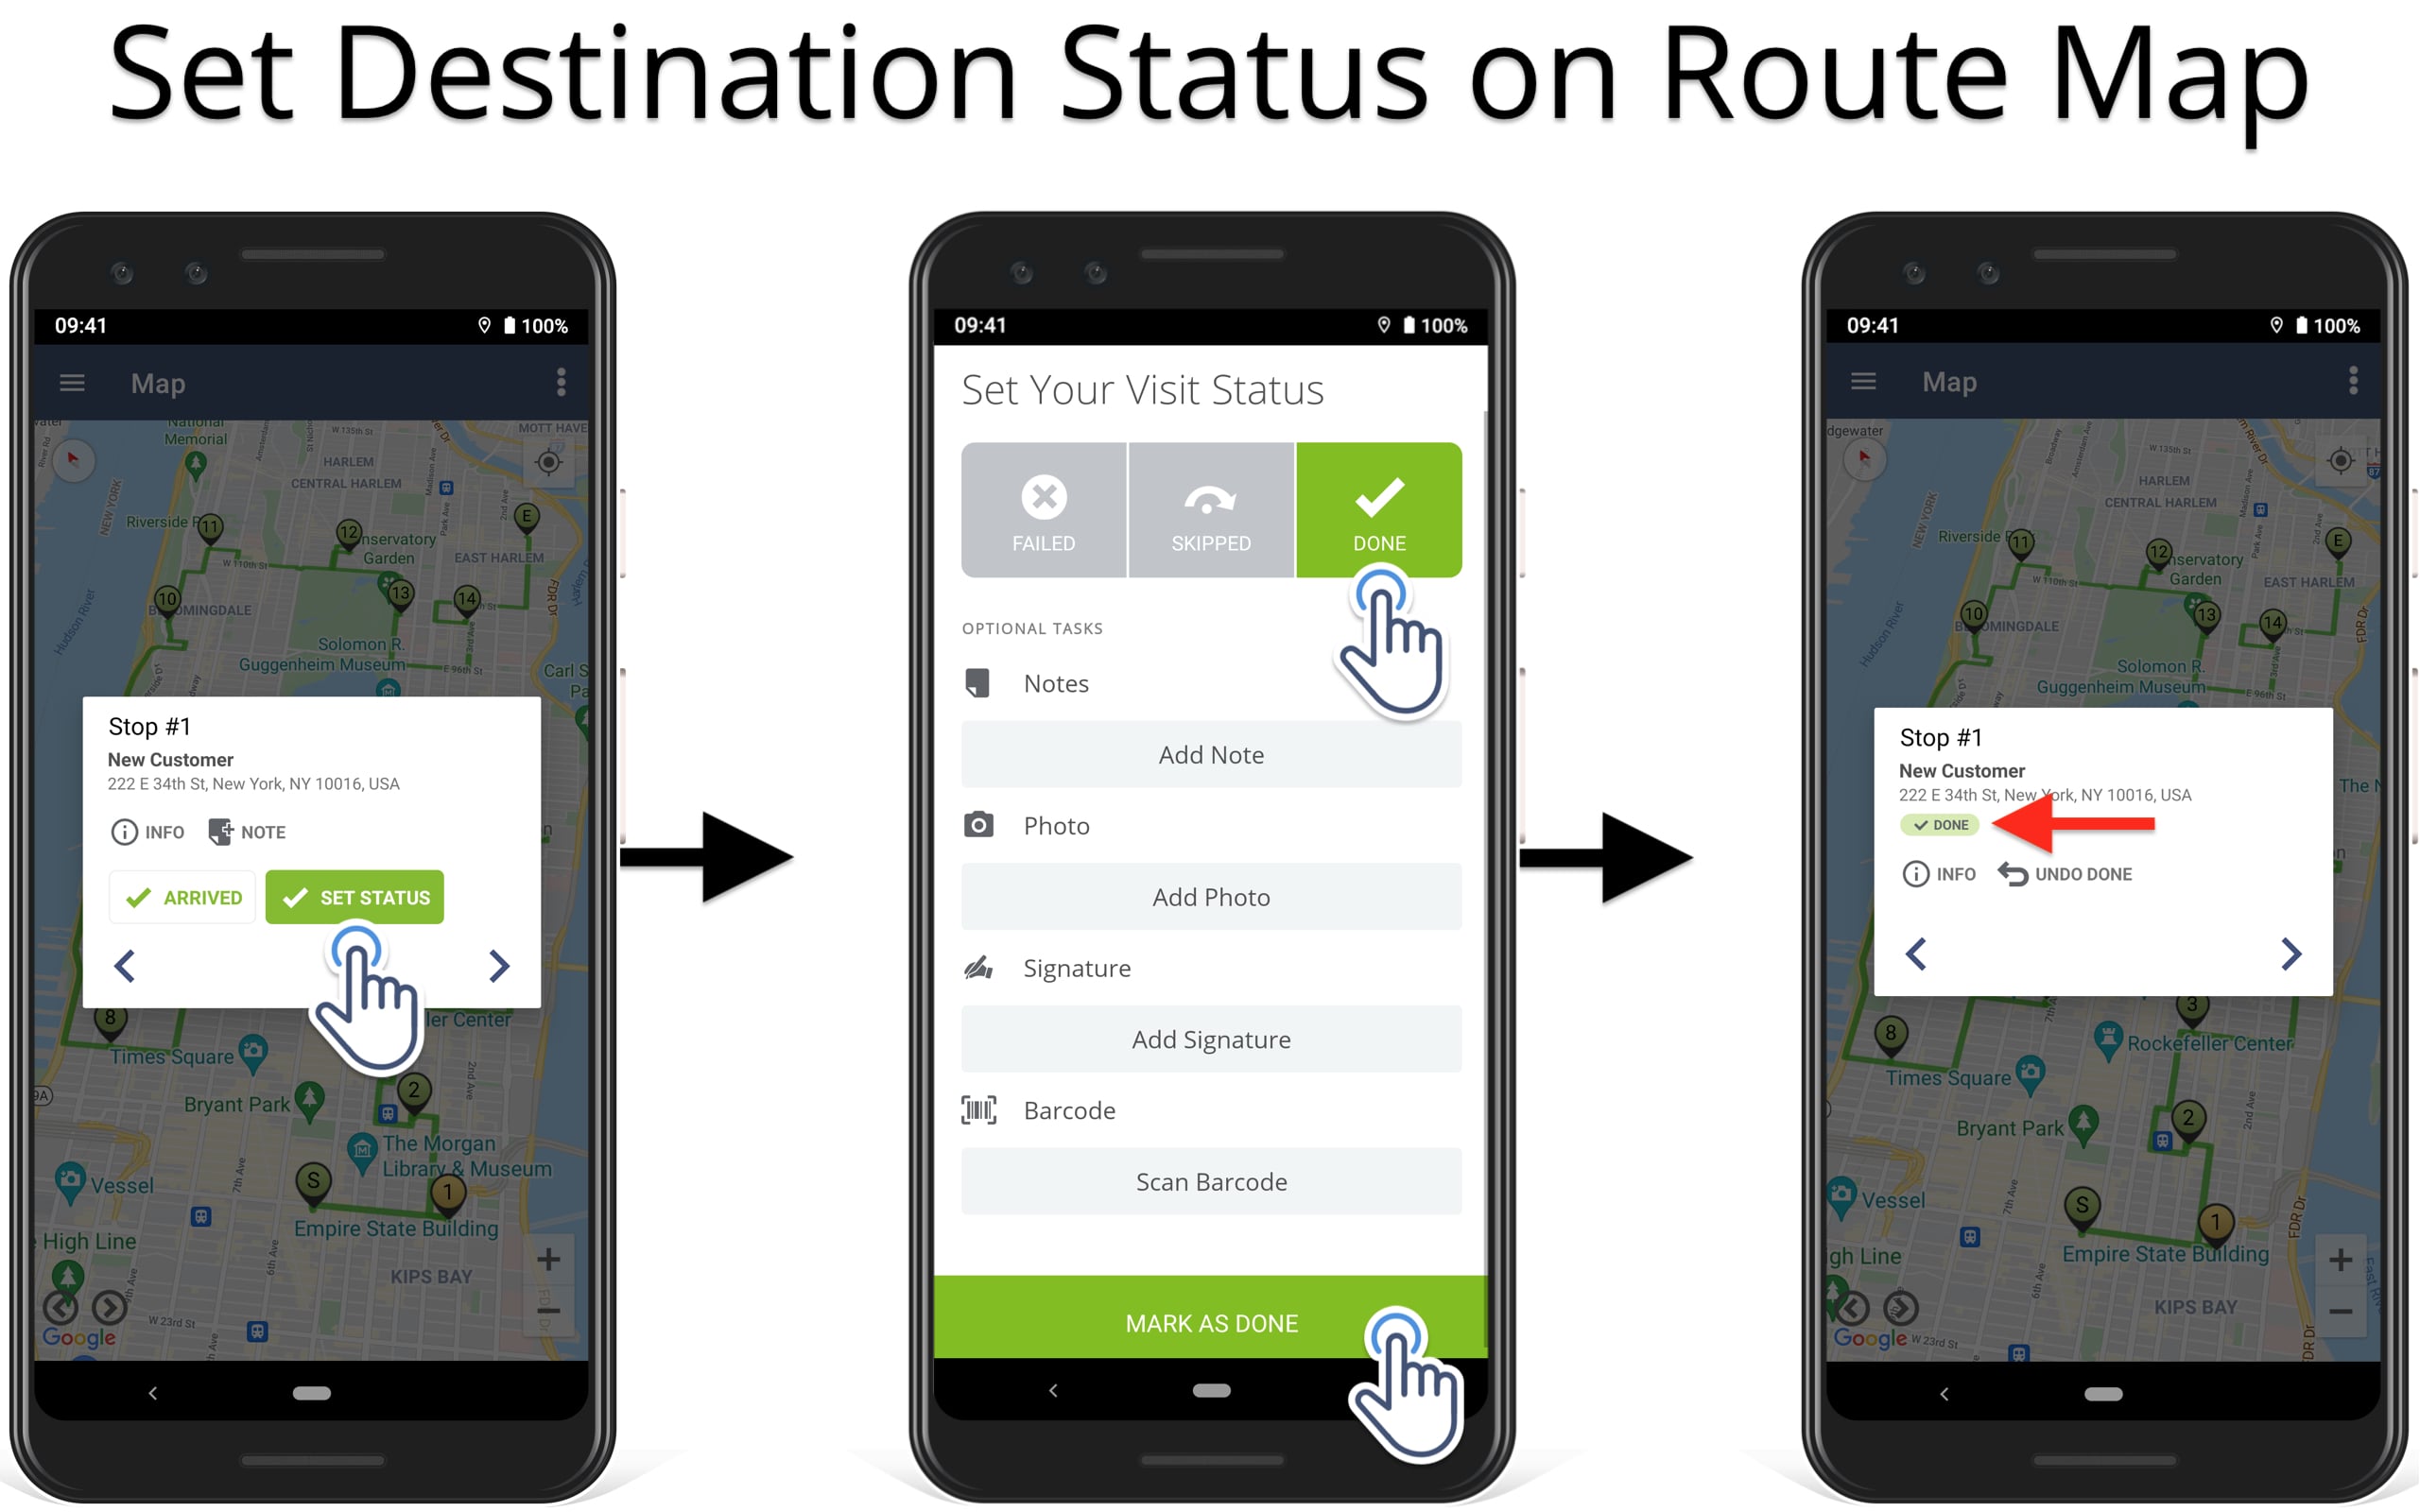 Use route planner map to set Failed, Skipped, and Done route stop statuses for route destinations.